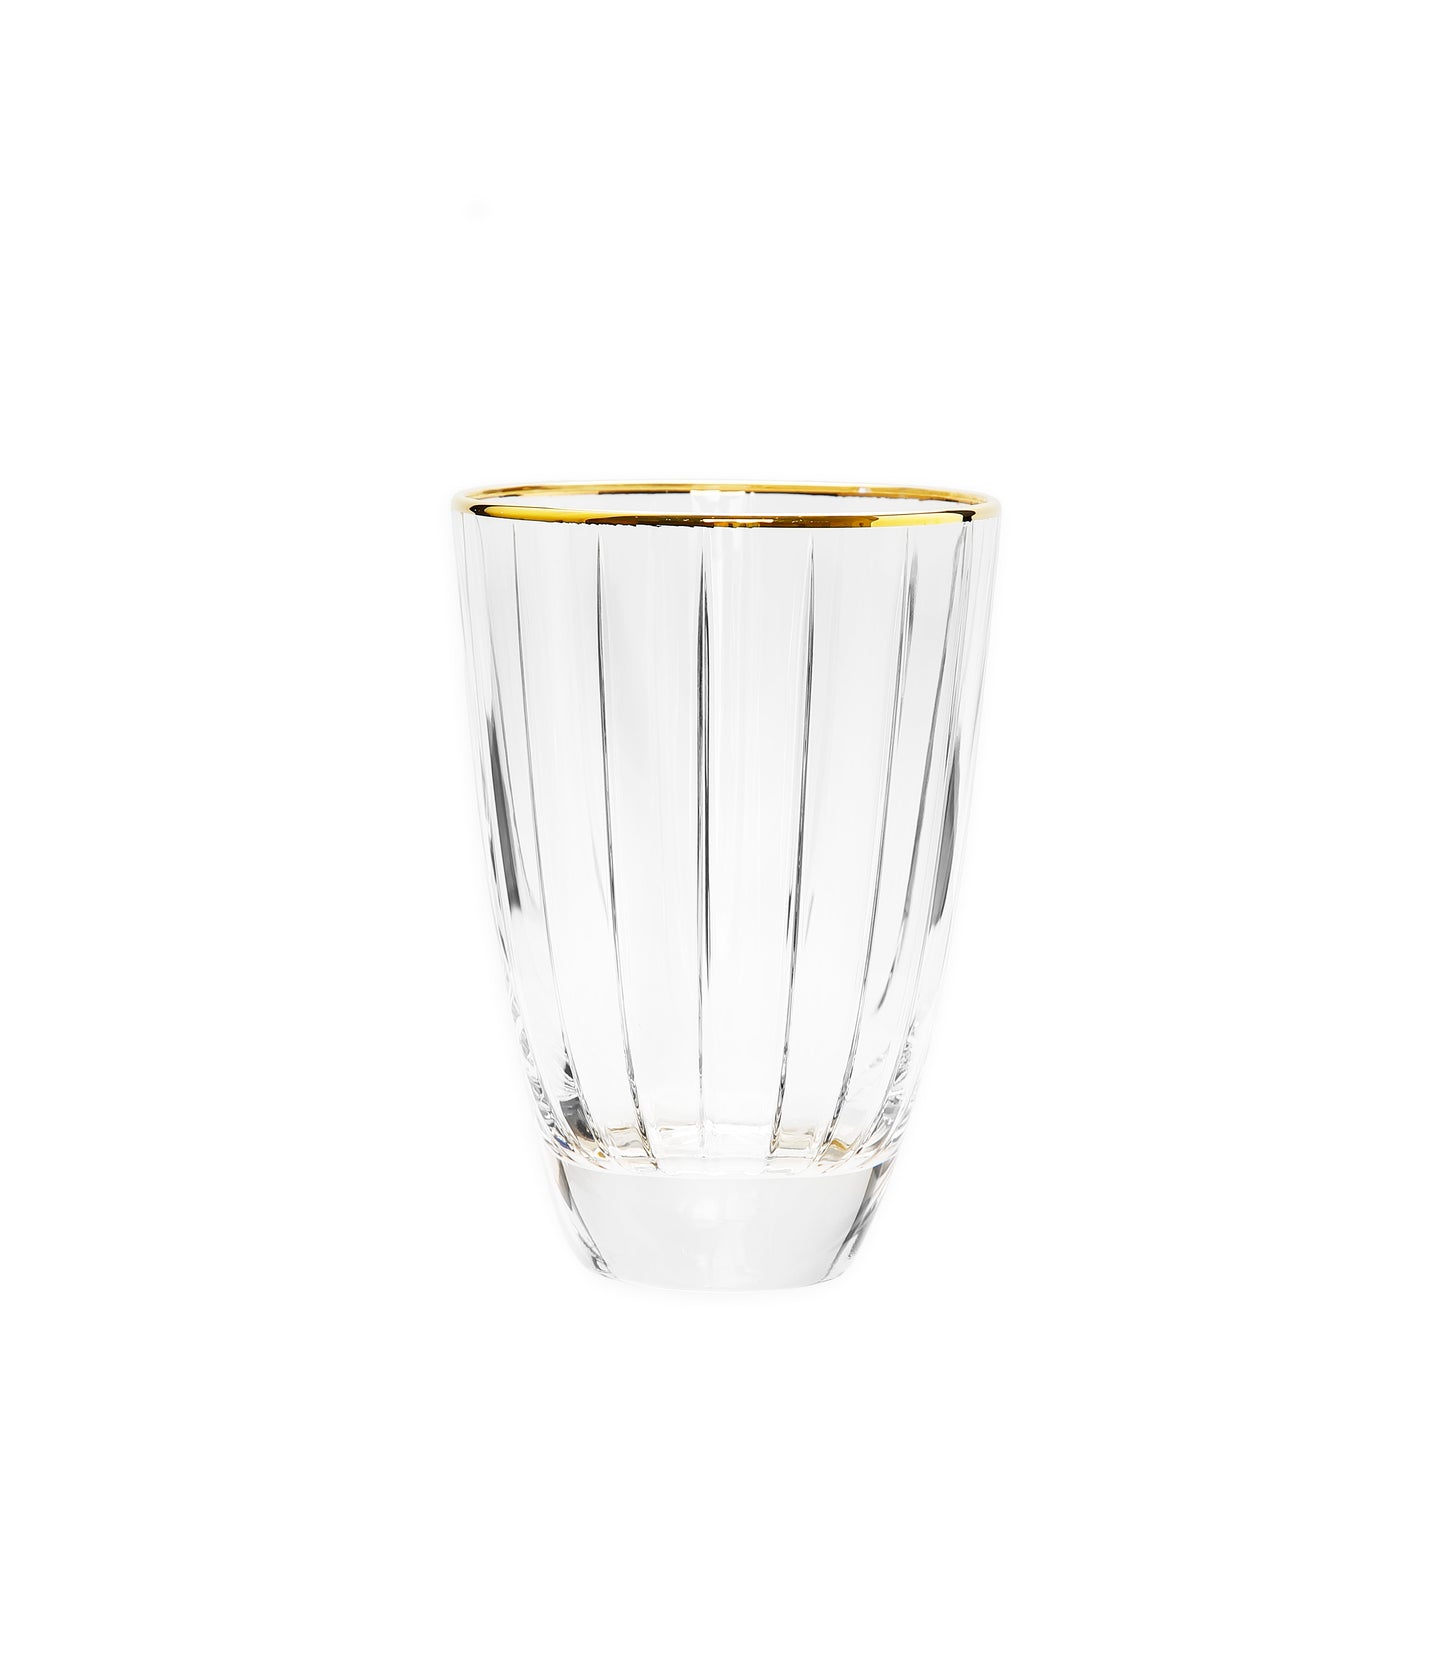 Set of 6 Tumblers with Gold Trim